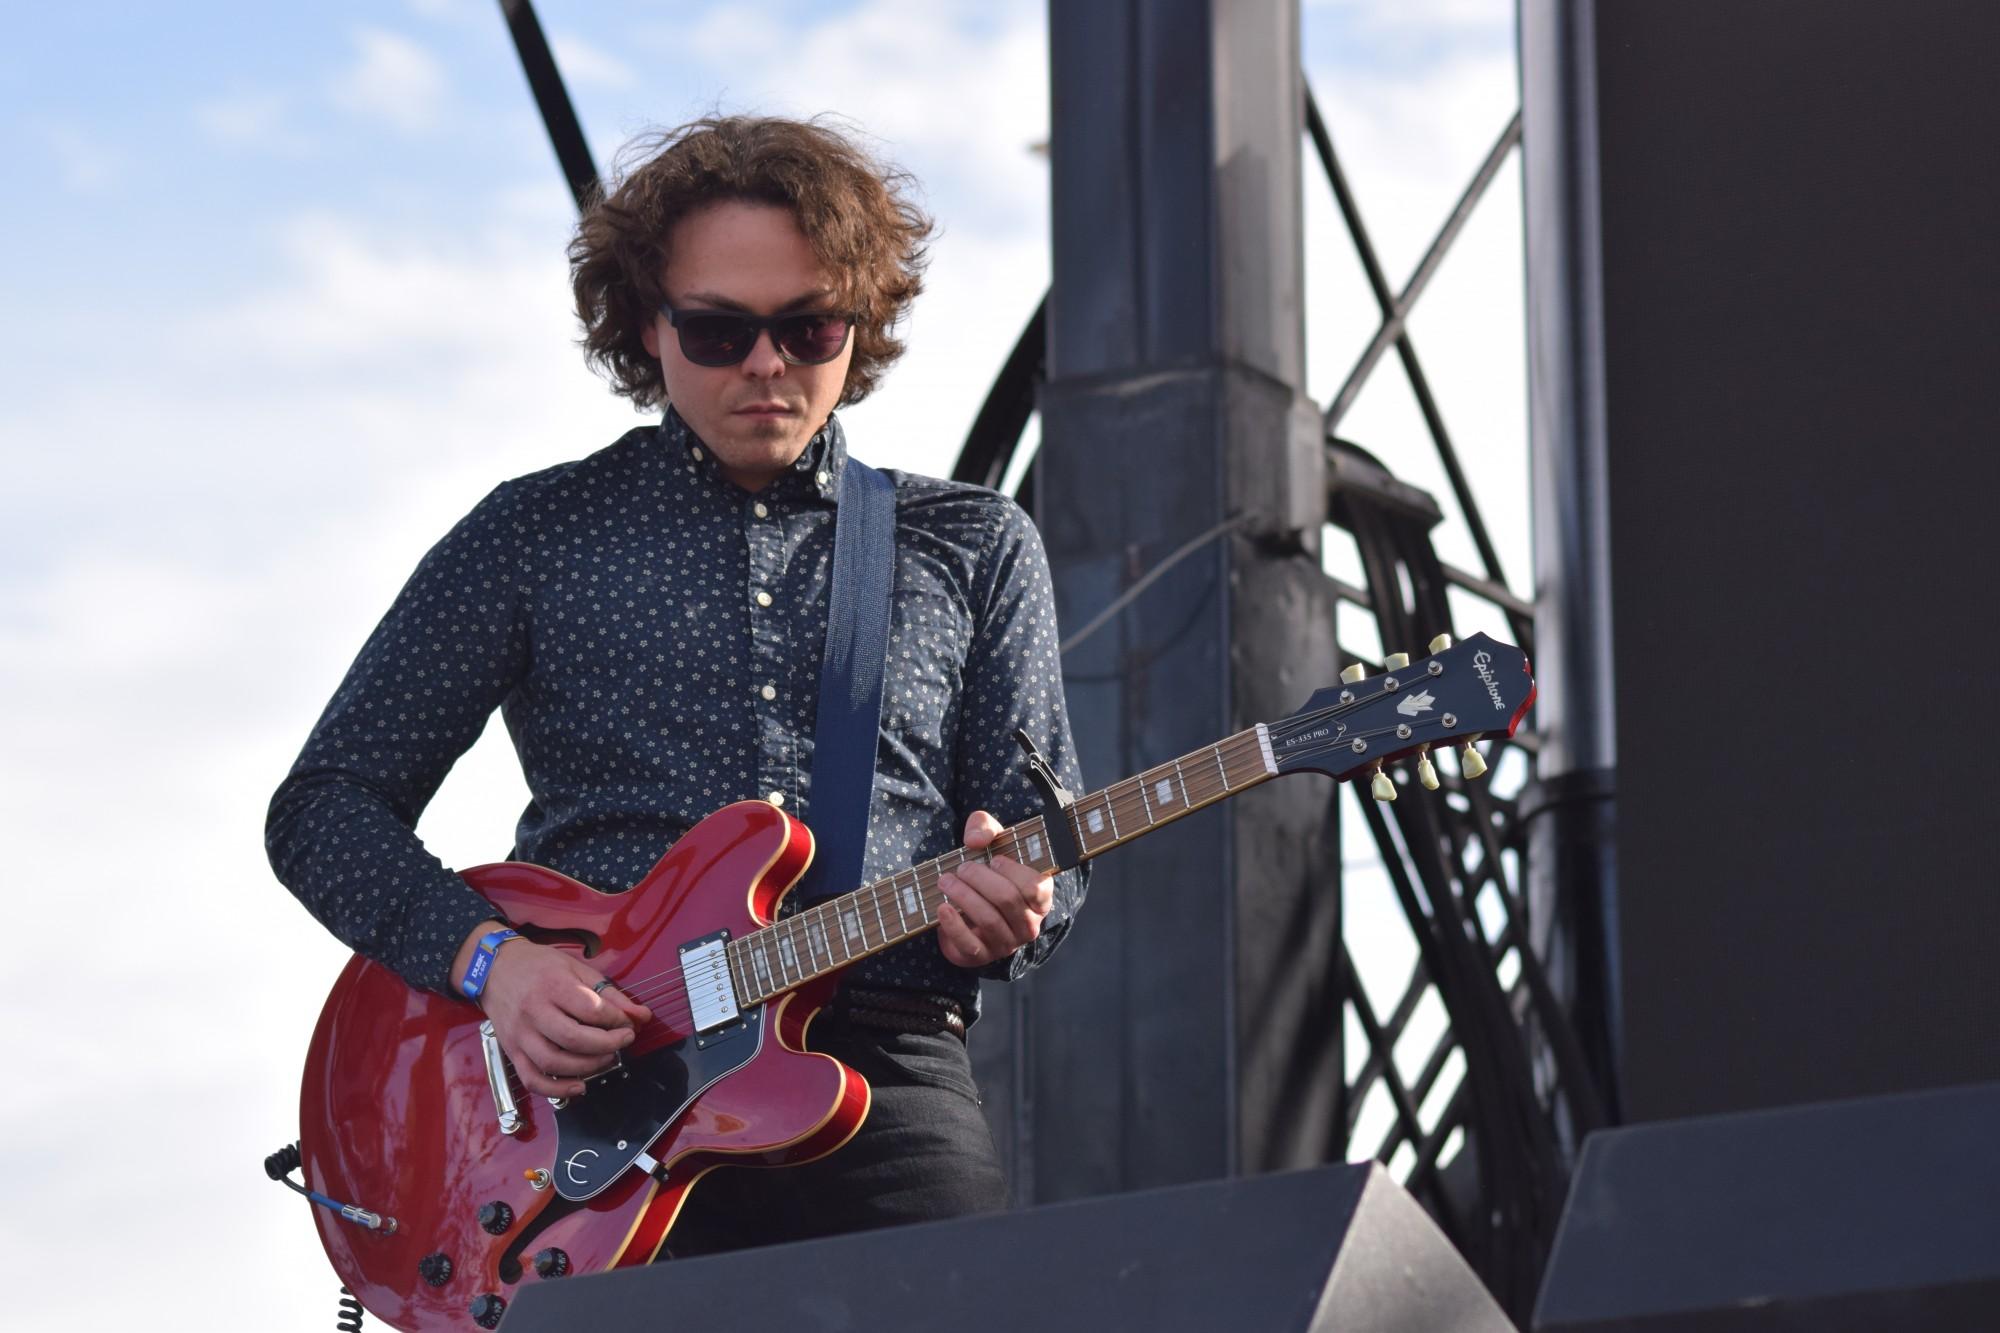 Guitarist for Nocturnal Theory, Clay Dudash performing at Dusk Music Festival on November 10. Nocturnal Theory is an Alternative Pop band from Tucson.
